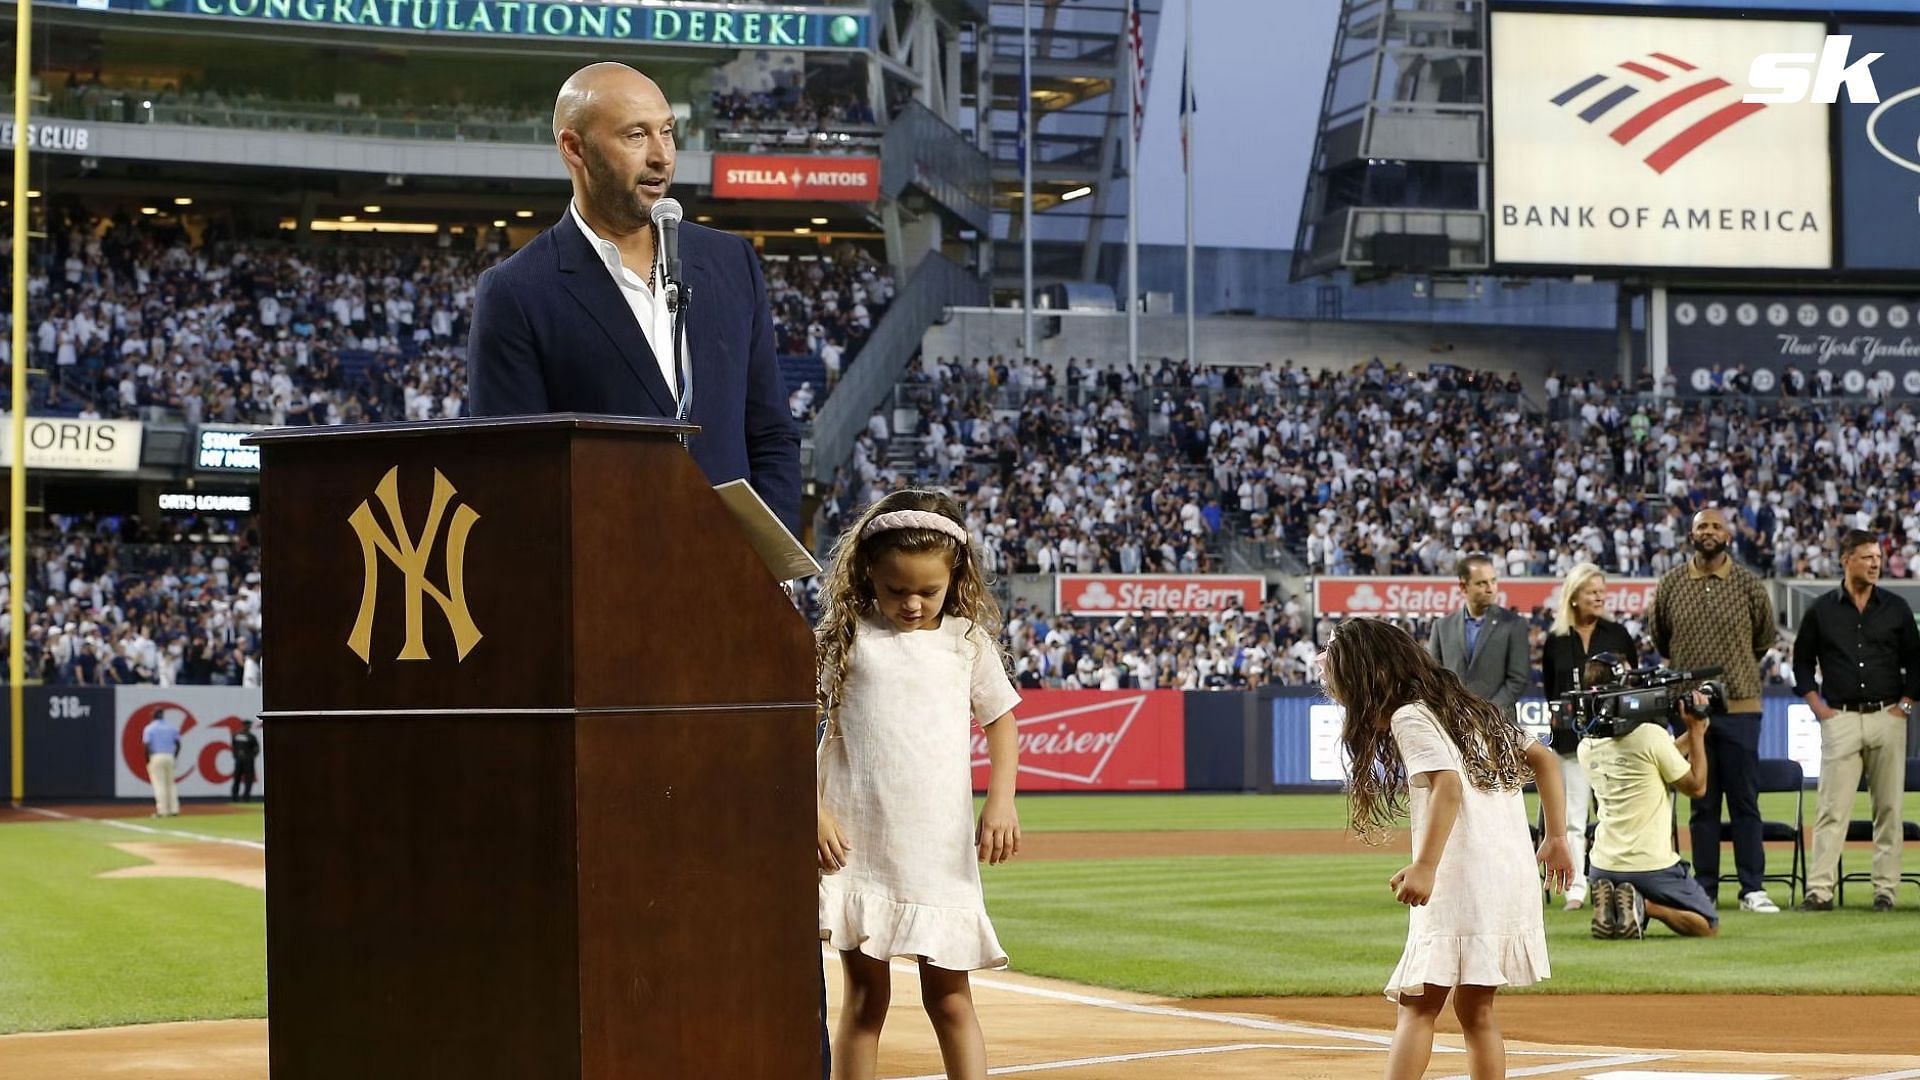 When Derek Jeter looked back upon his journey to Cooperstown, in his Hall of Fame enshrinement speech